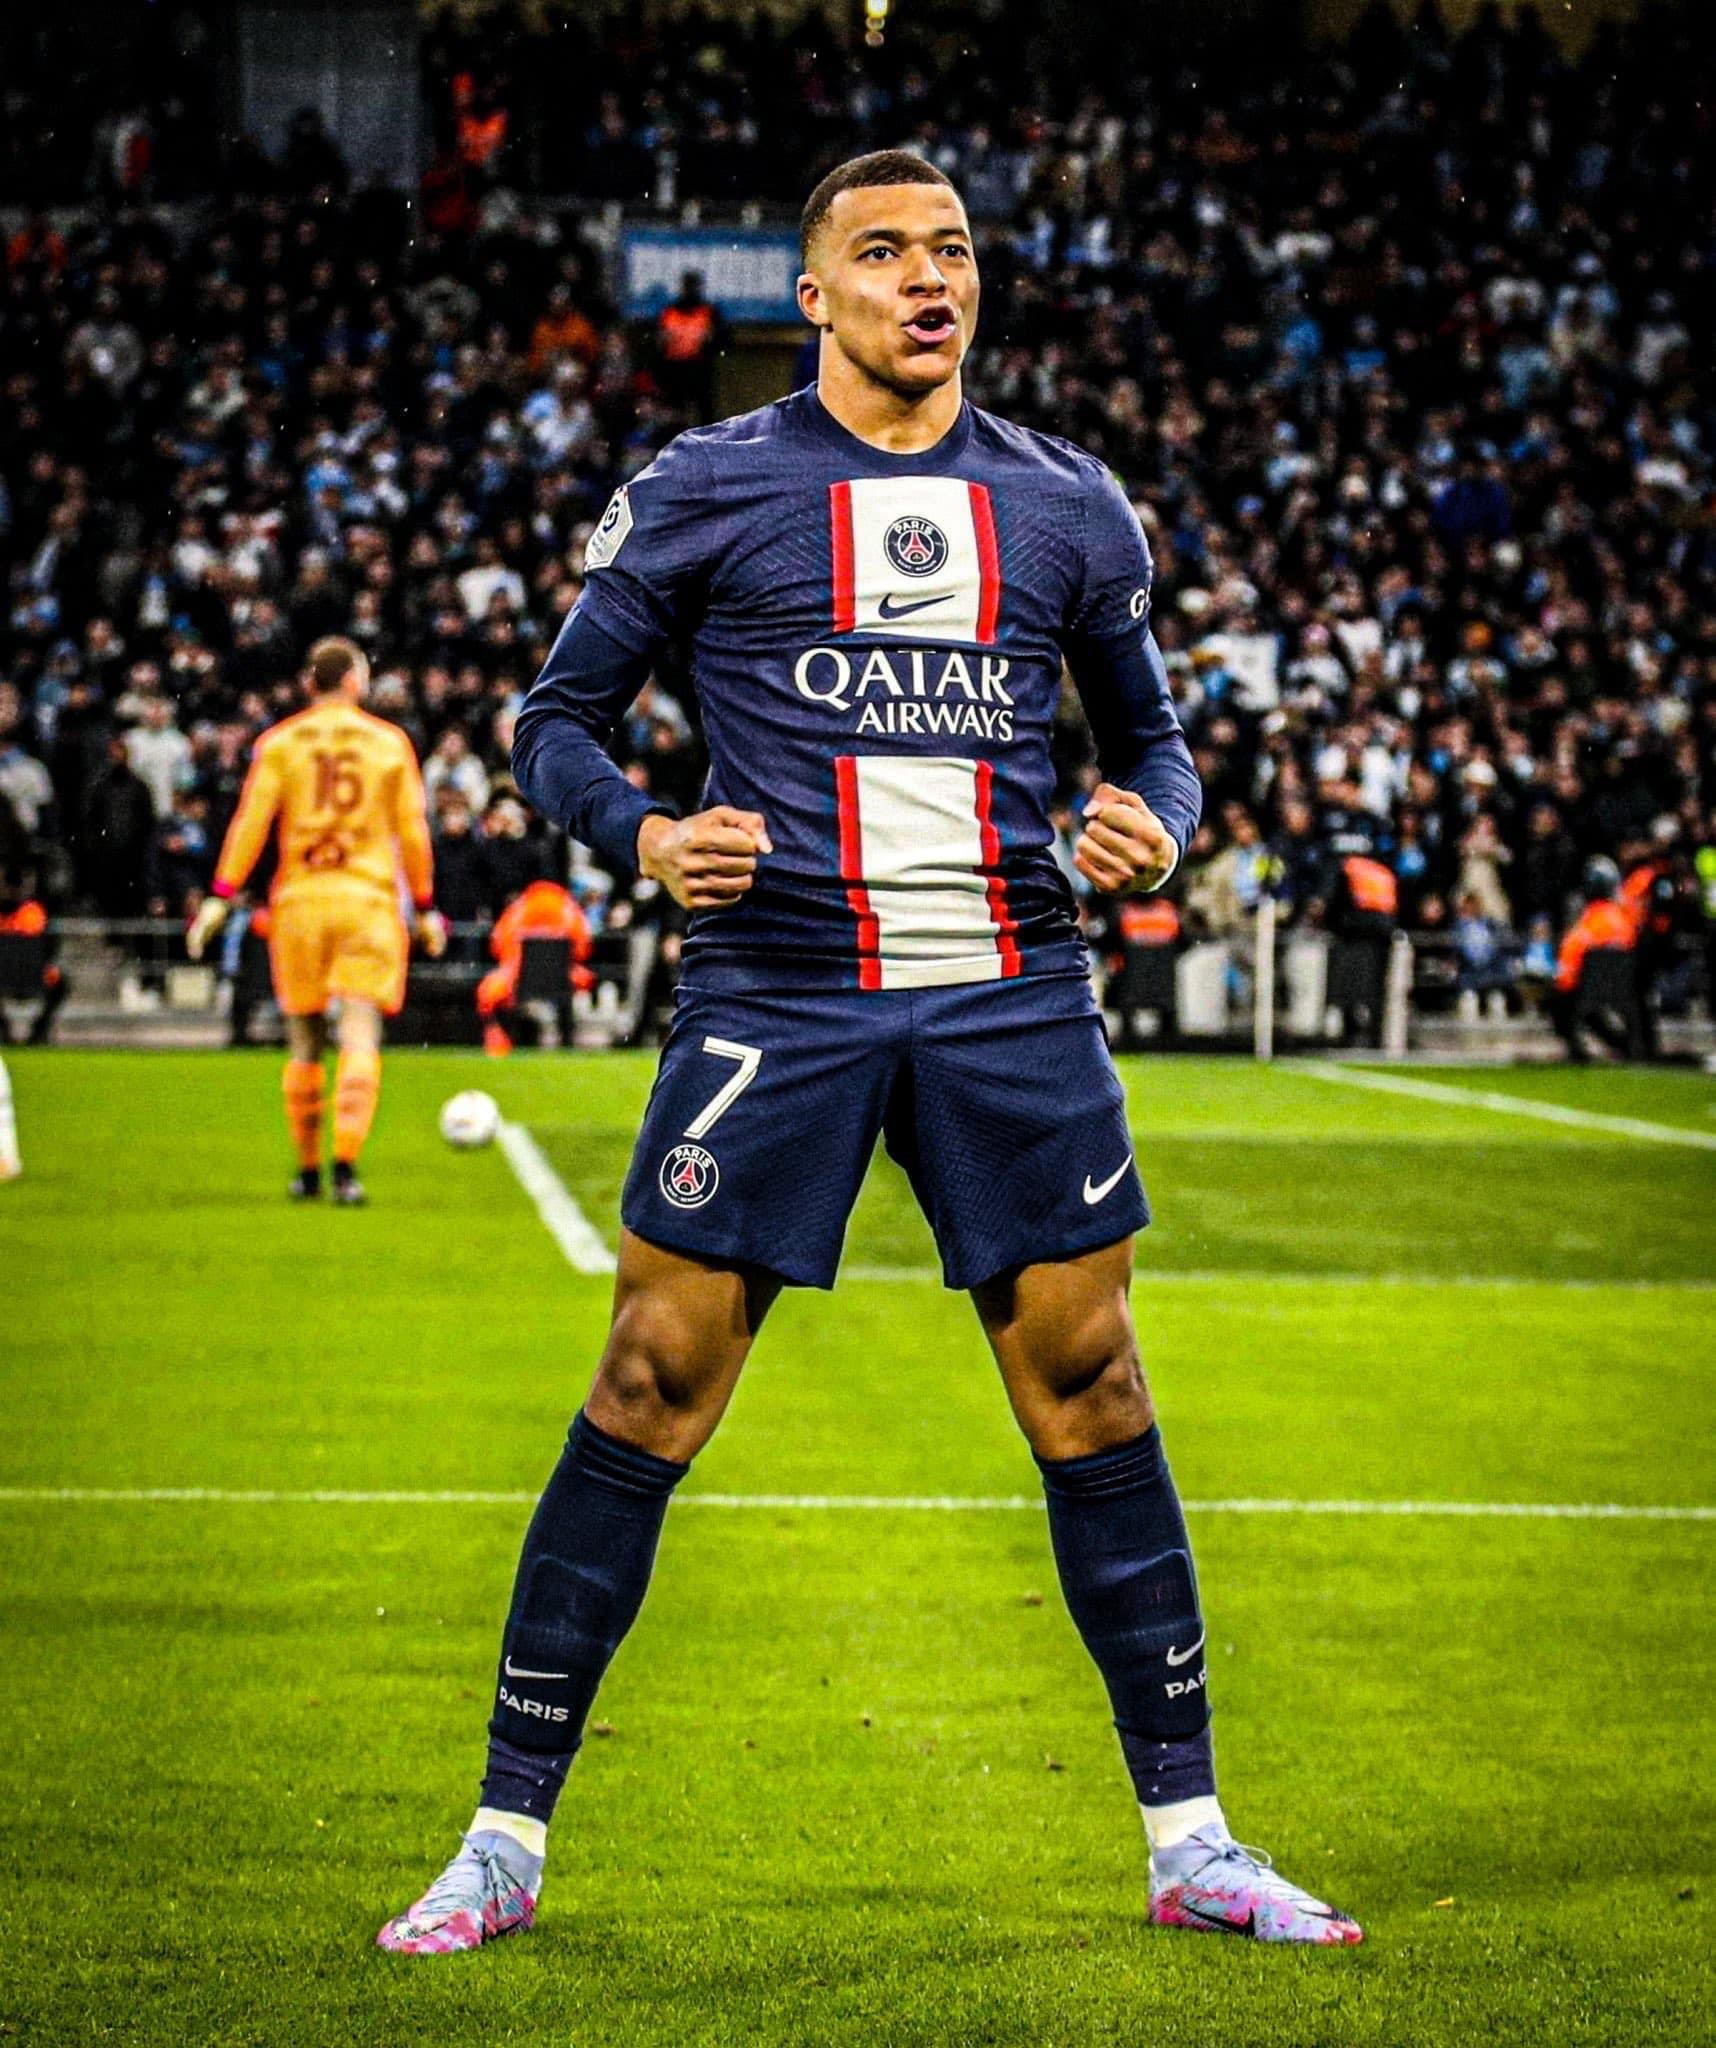 Mbappe Hd wallpapers 